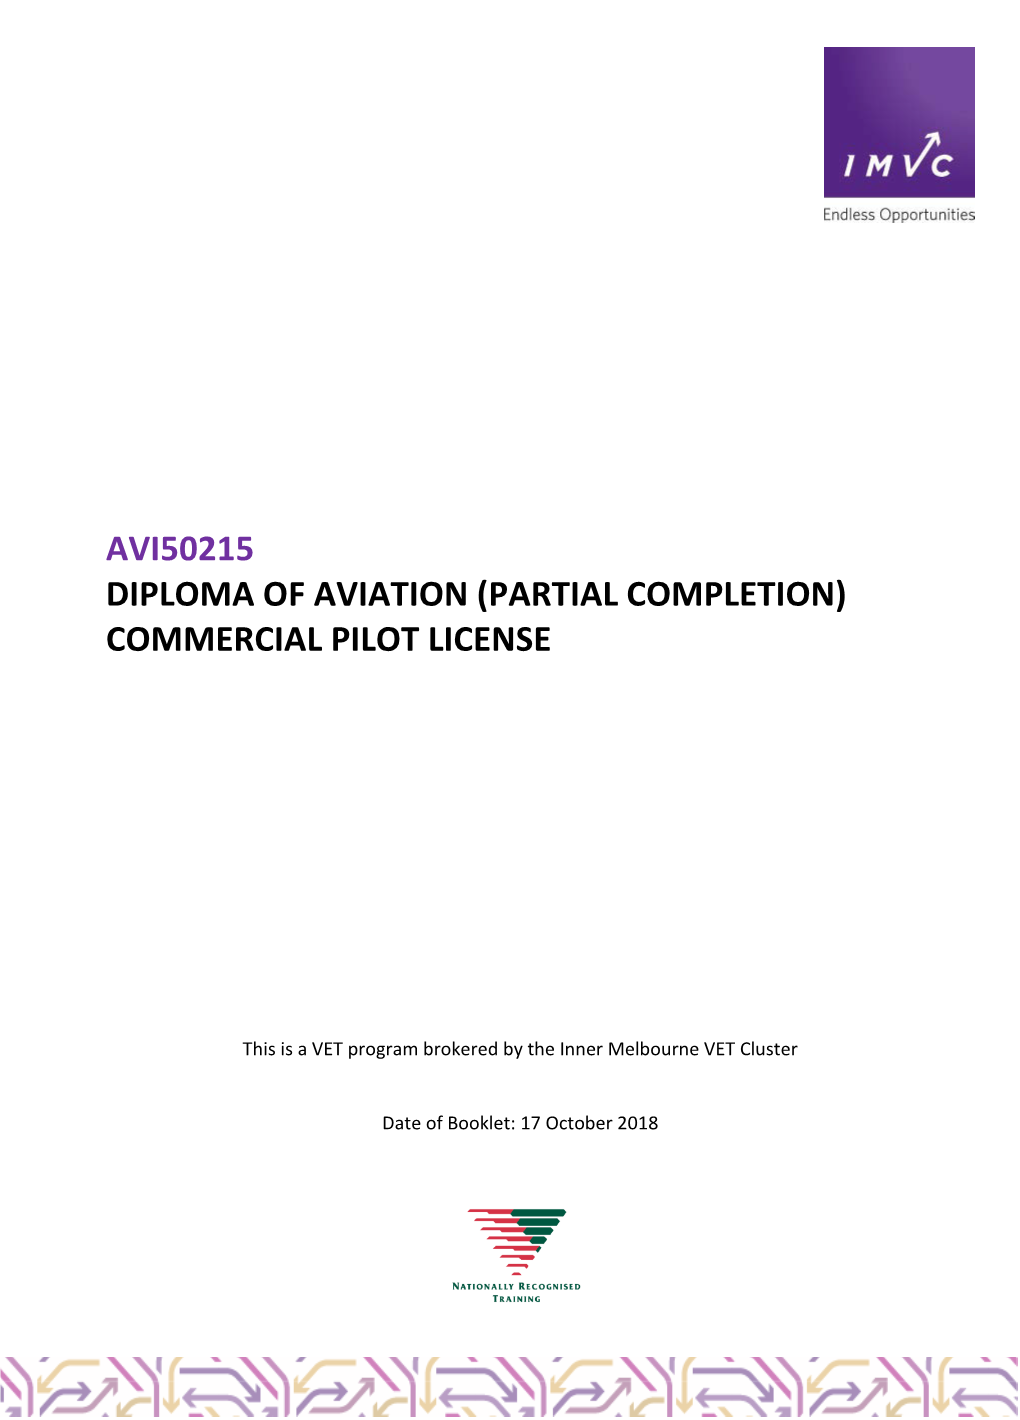 Avi50215 Diploma of Aviation (Partial Completion) Commercial Pilot License